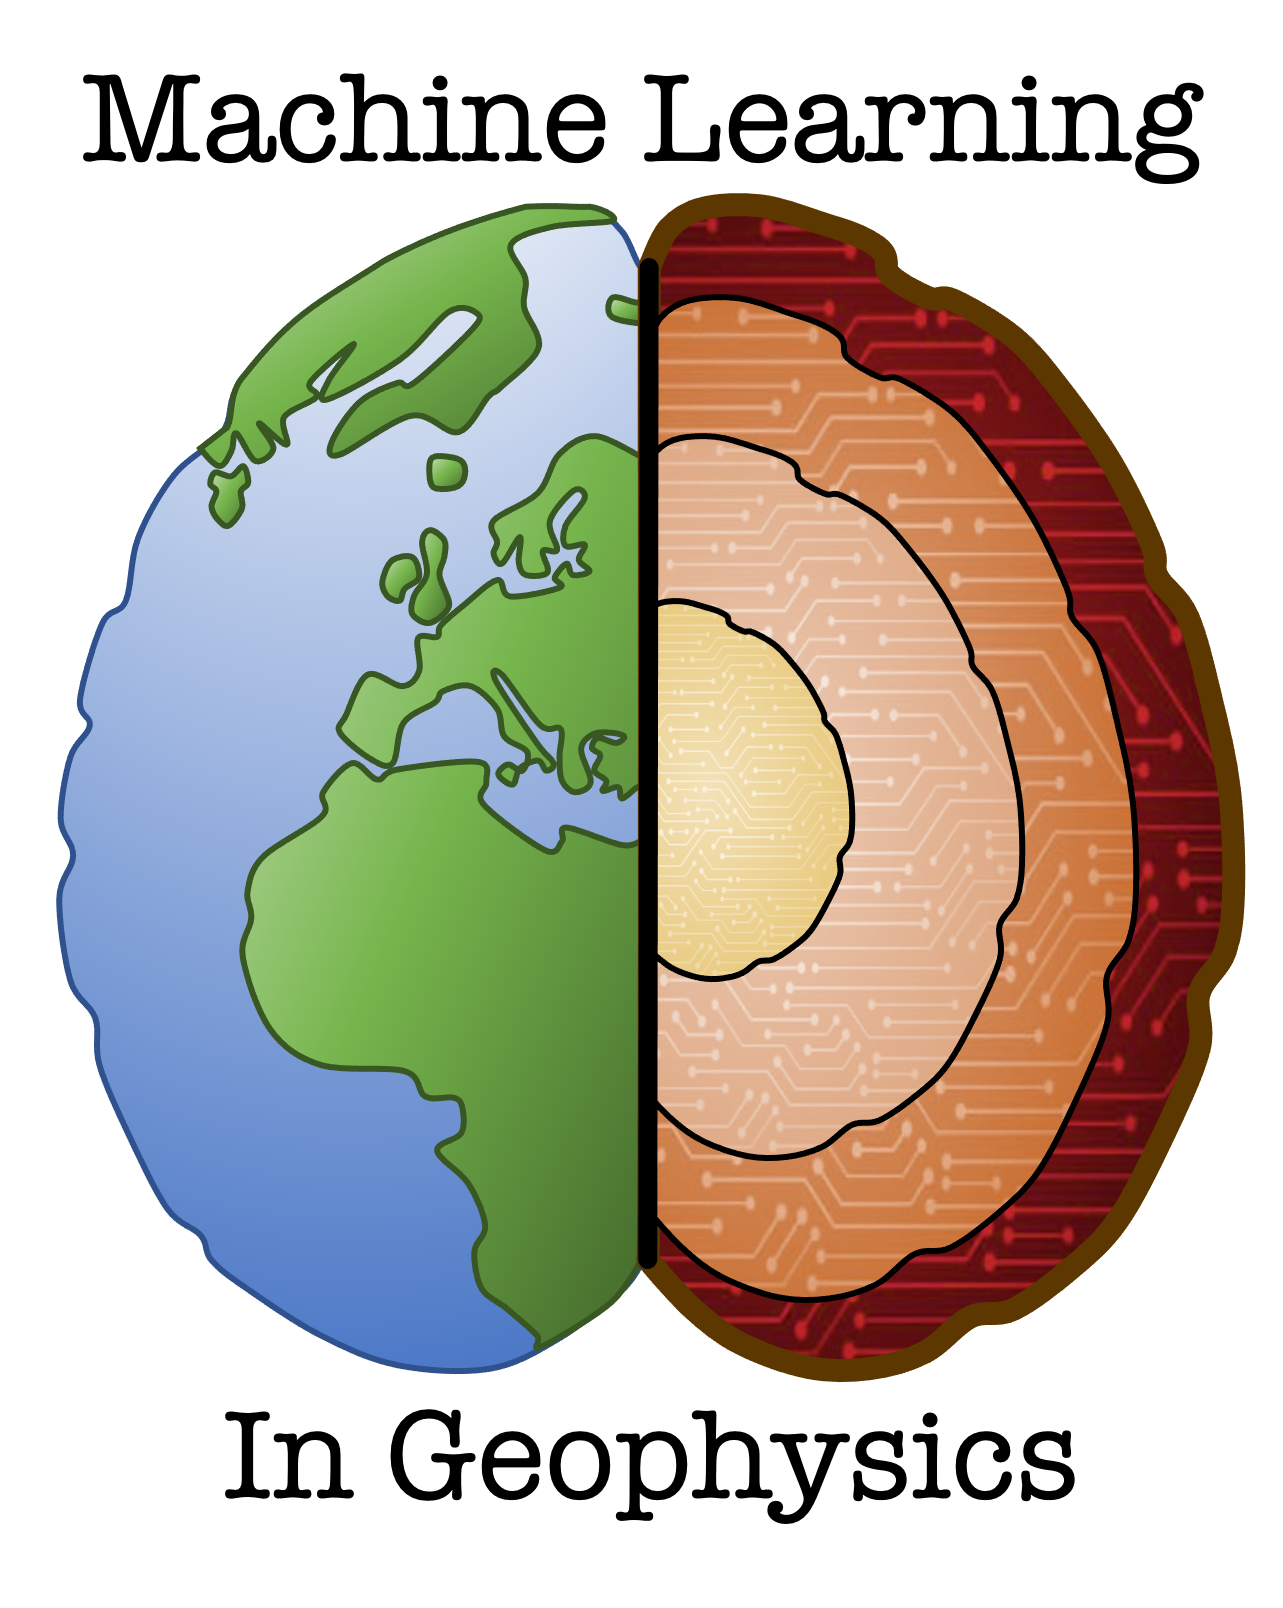 Machine Learning logo - half a globe and tectonic plates in the shape of a brain